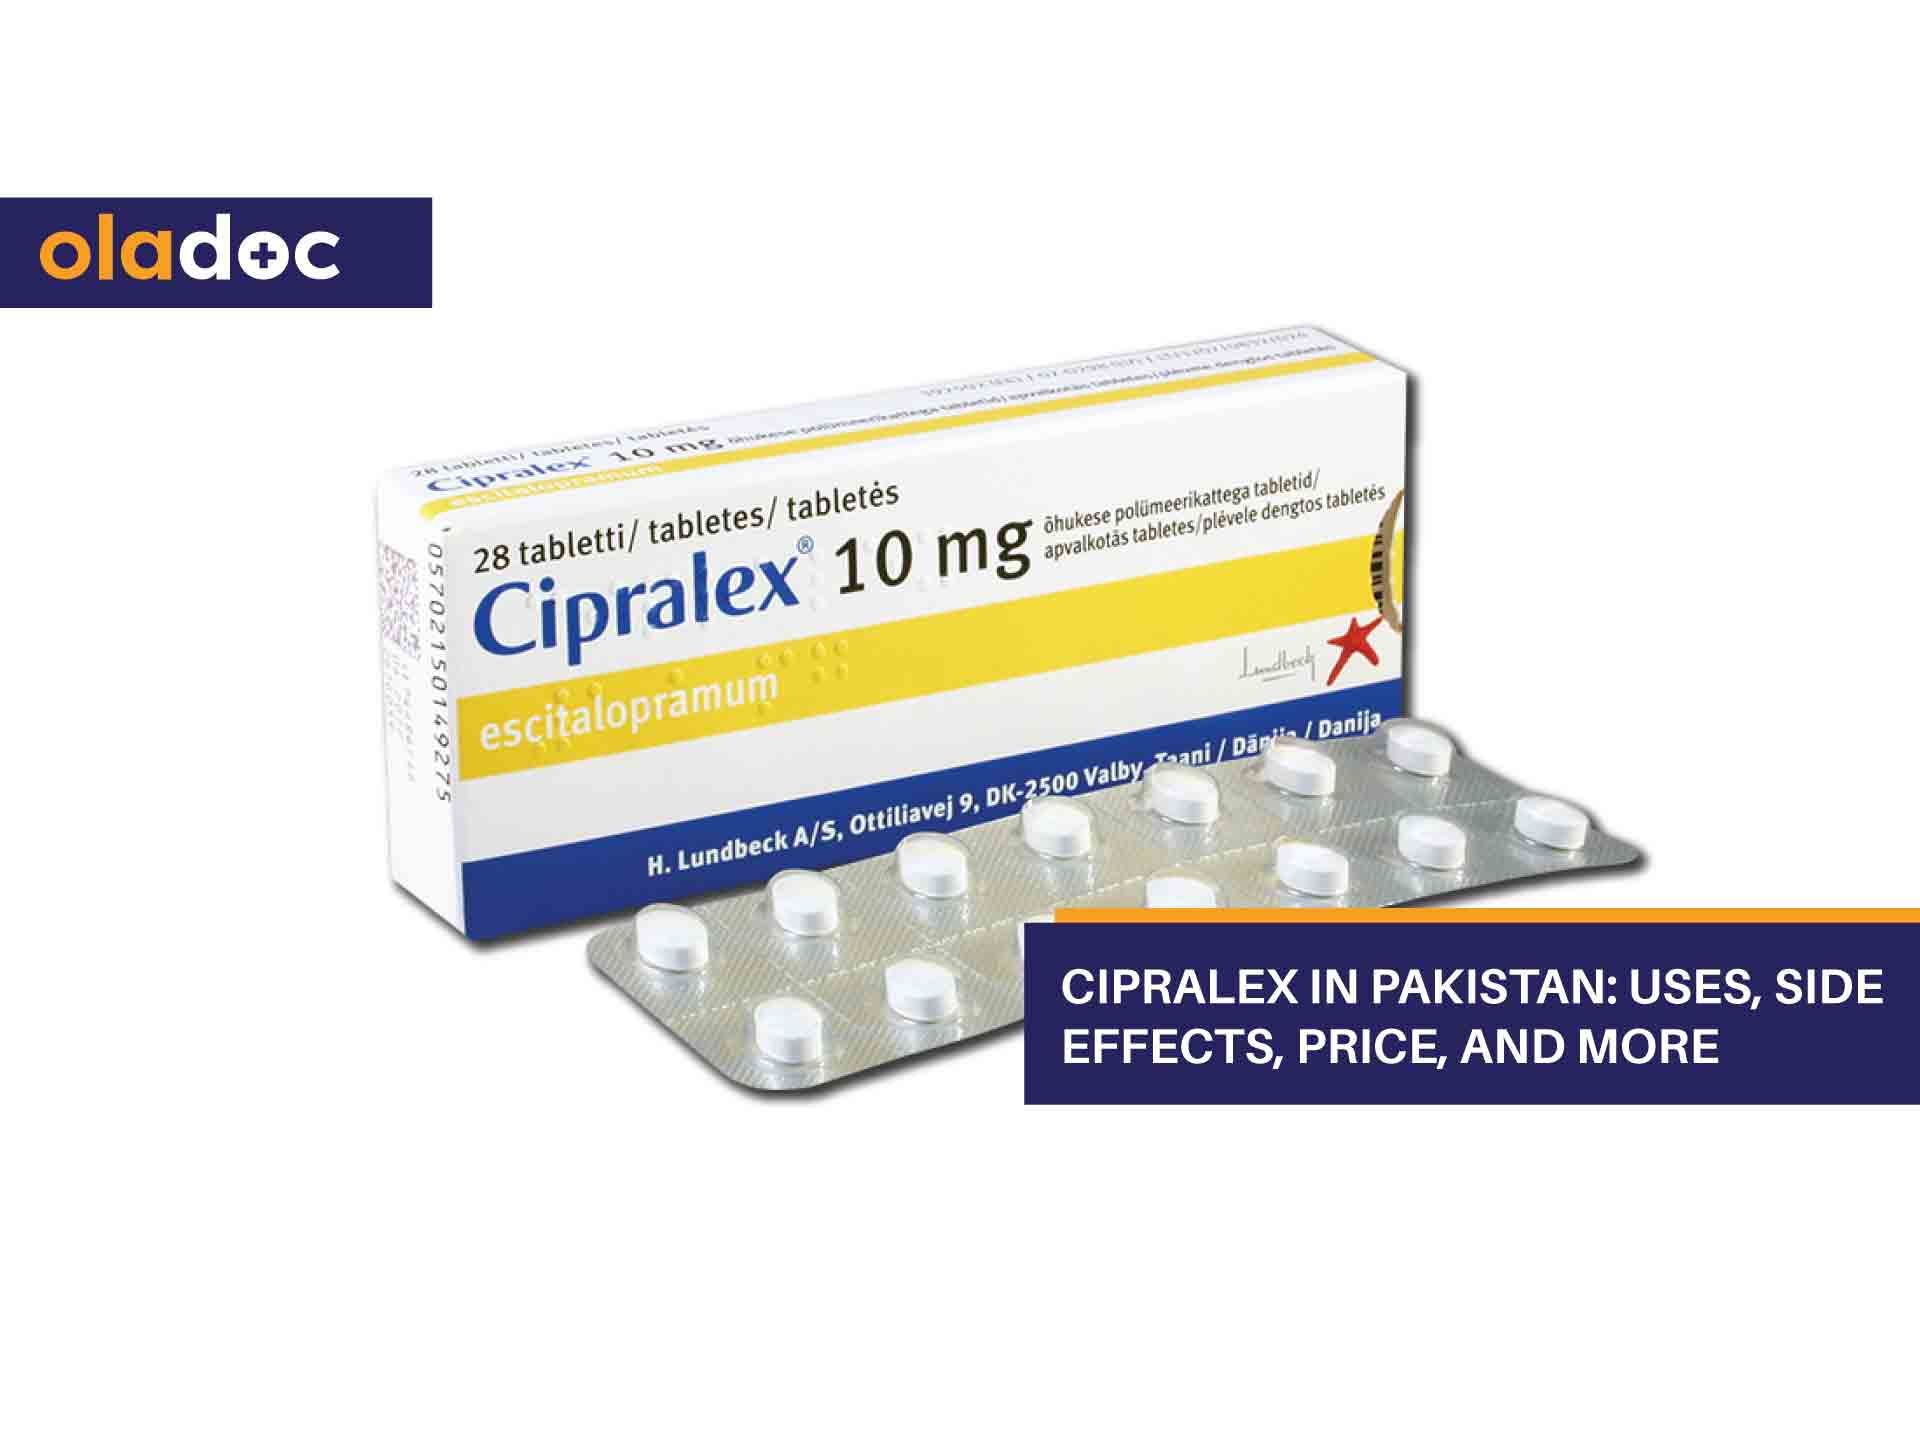 Cipralex in Pakistan: Uses, Side Effects, Price, and More